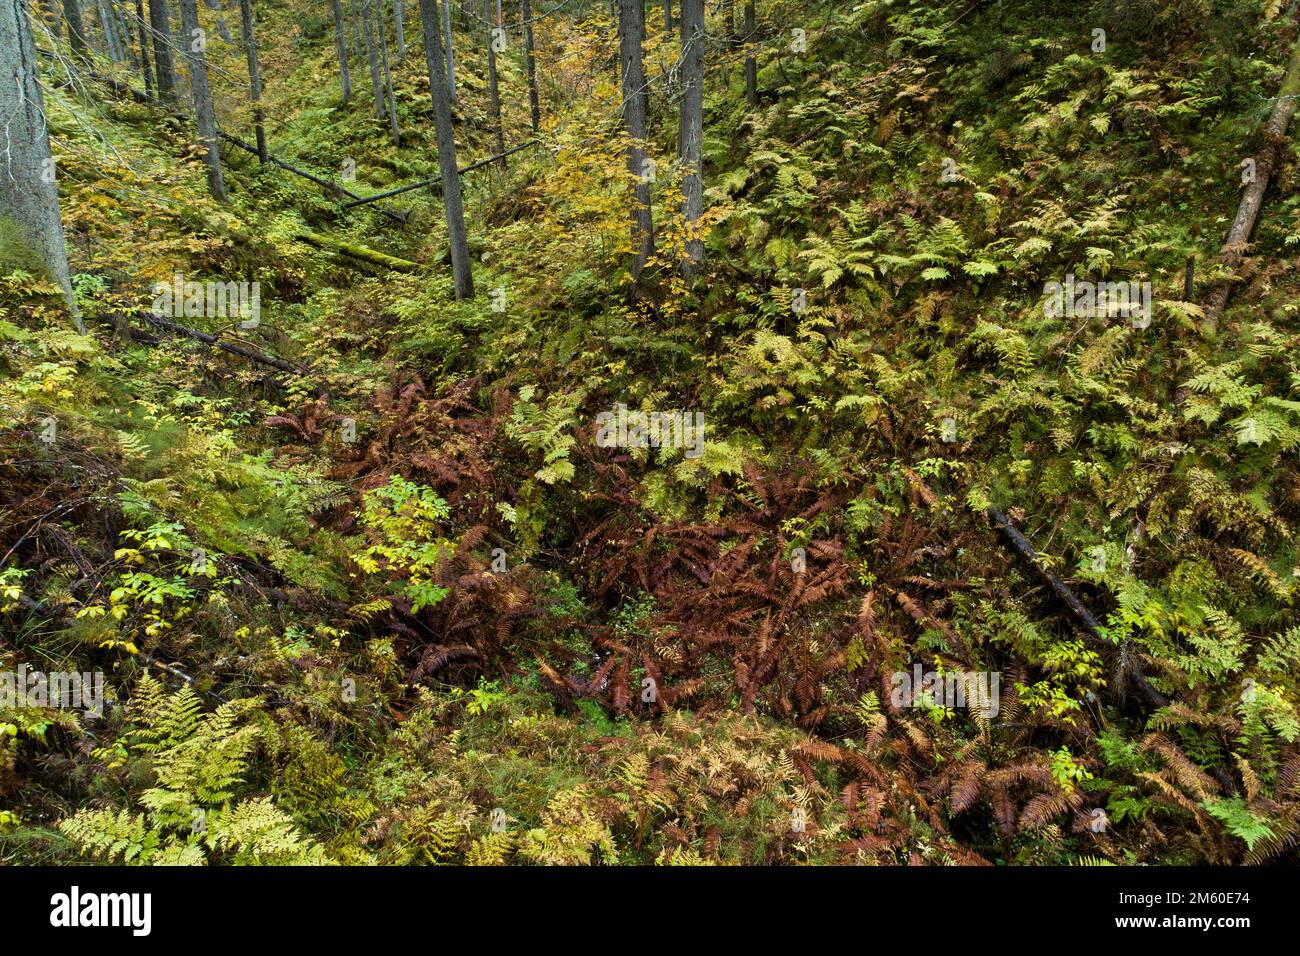 An old-growth forest growing in a valley in Northern Finland near Kuopio Stock Photo